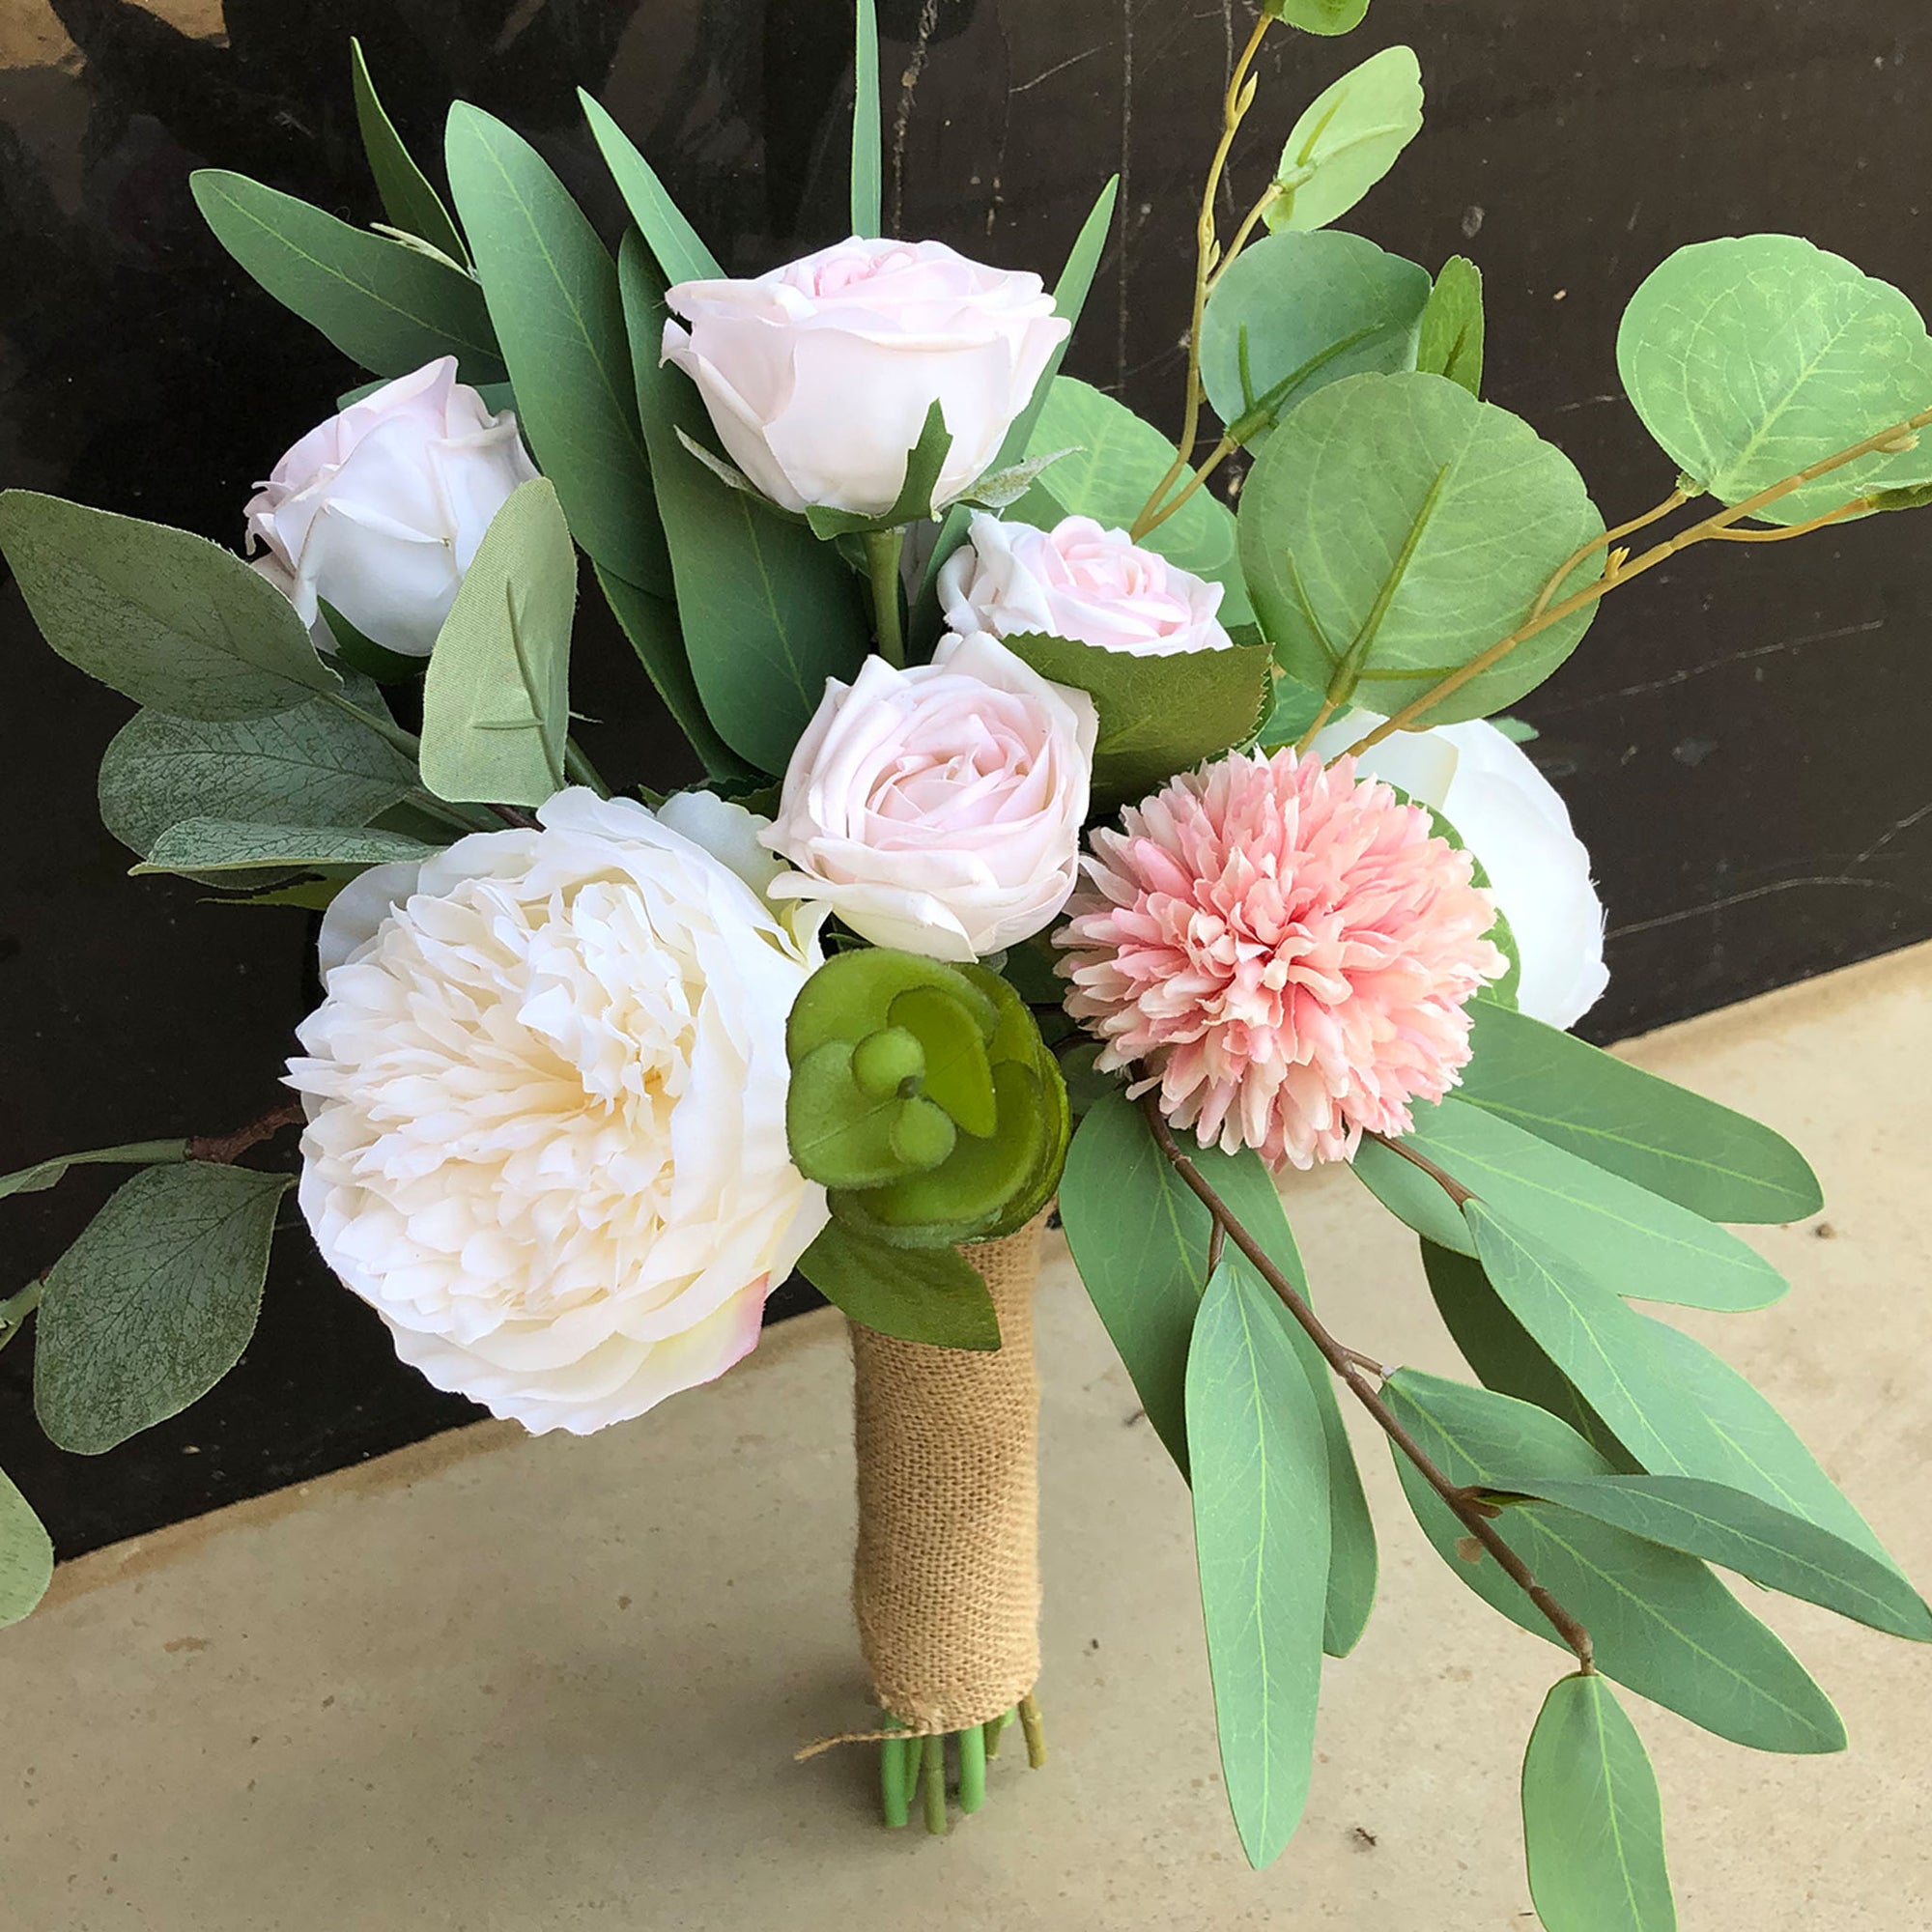 Rustic Wedding Flowers Pink Roses Daisy for Bridesmaid Bouquet